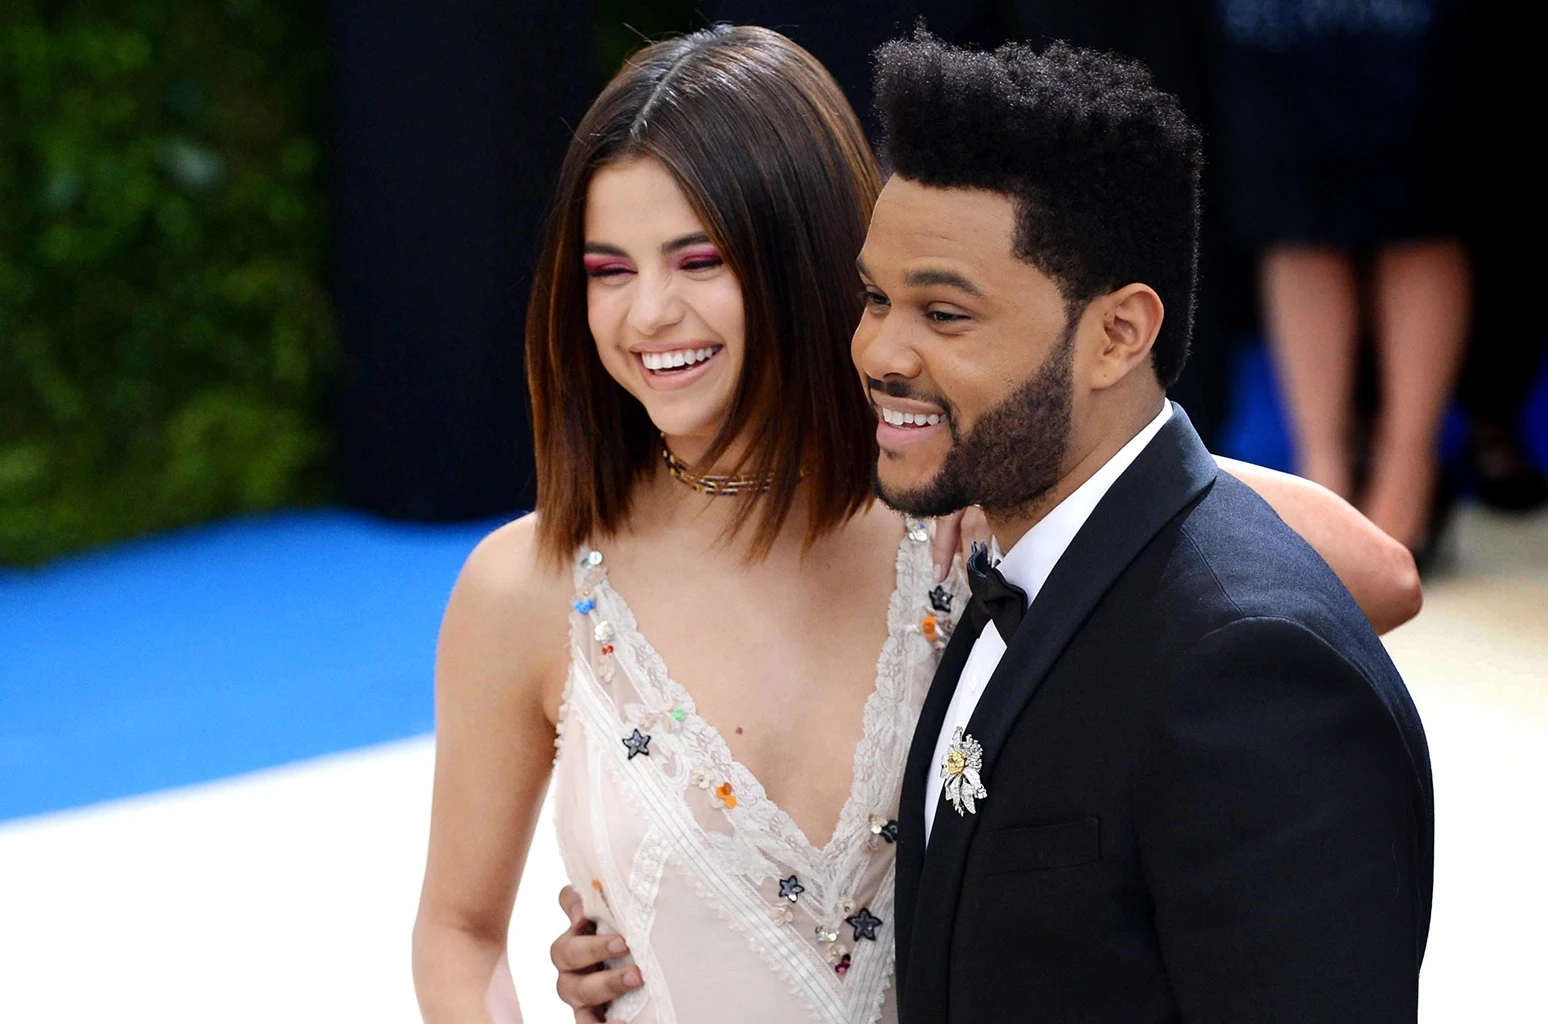 Selena Gomez had a brief entanglement with The Weeknd